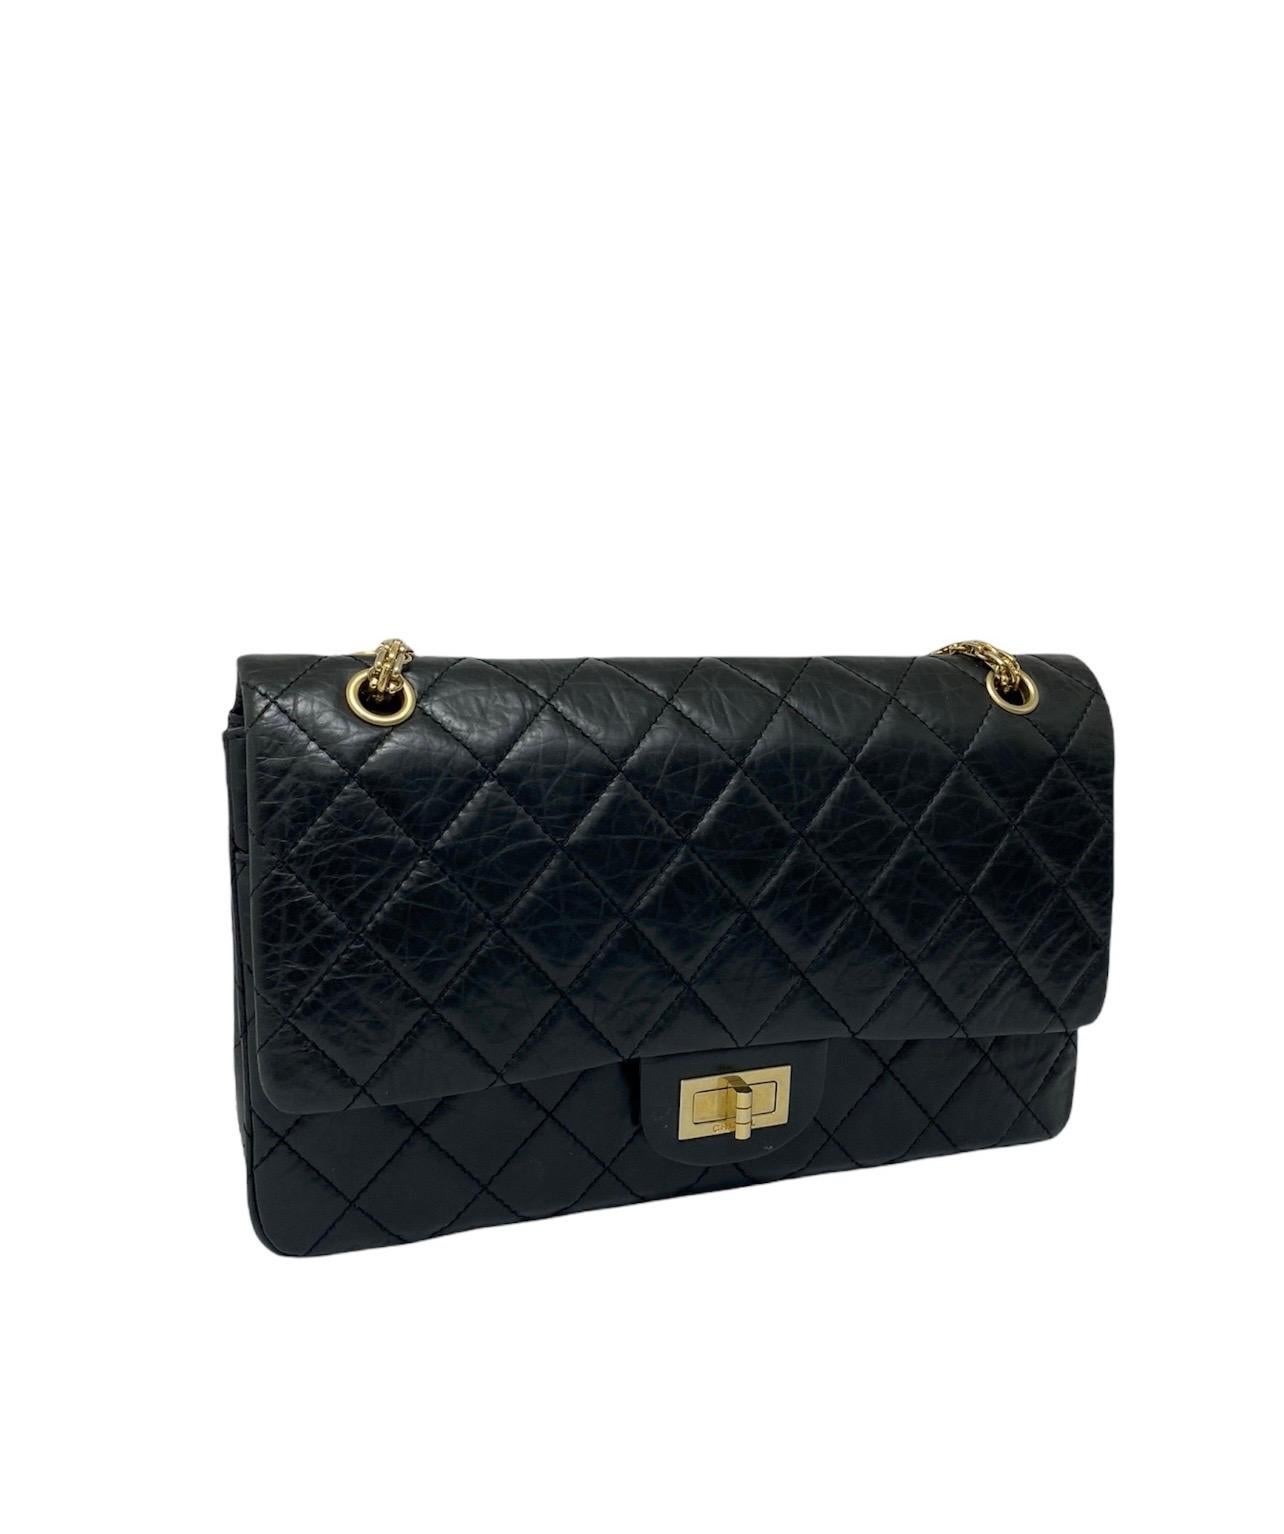 Chanel celebrates the 50th anniversary of the classic Chanel 2.55 bag with this beautiful edition in black quilted leather with gold hardware. Year of the scholarship 2005.  The bag is double flap with interlocking closure. The interior is lined